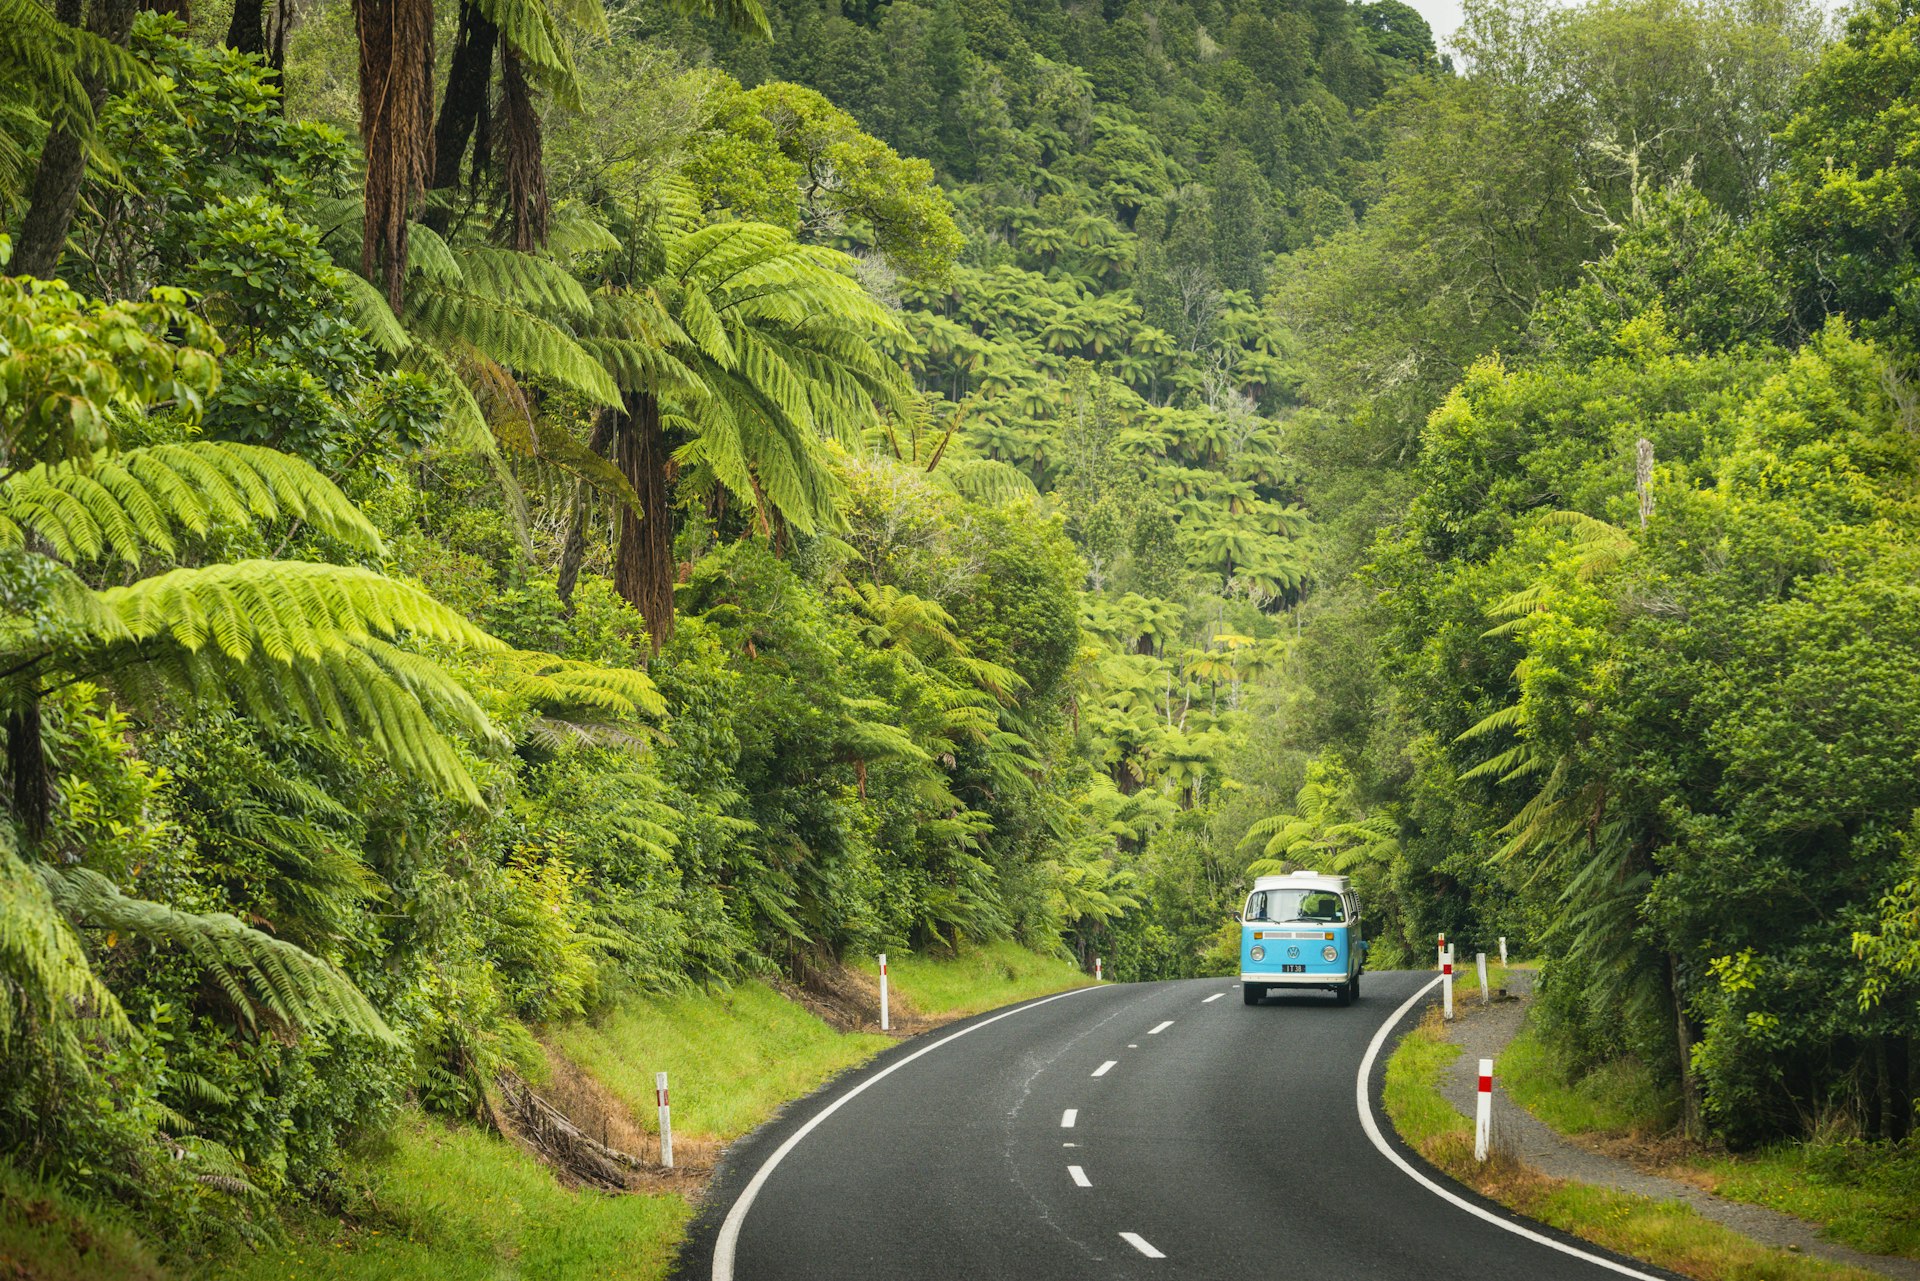 Combi van along road surrounded by tree ferns and palms in the Waitakere Ranges, between Auckland and Piha.